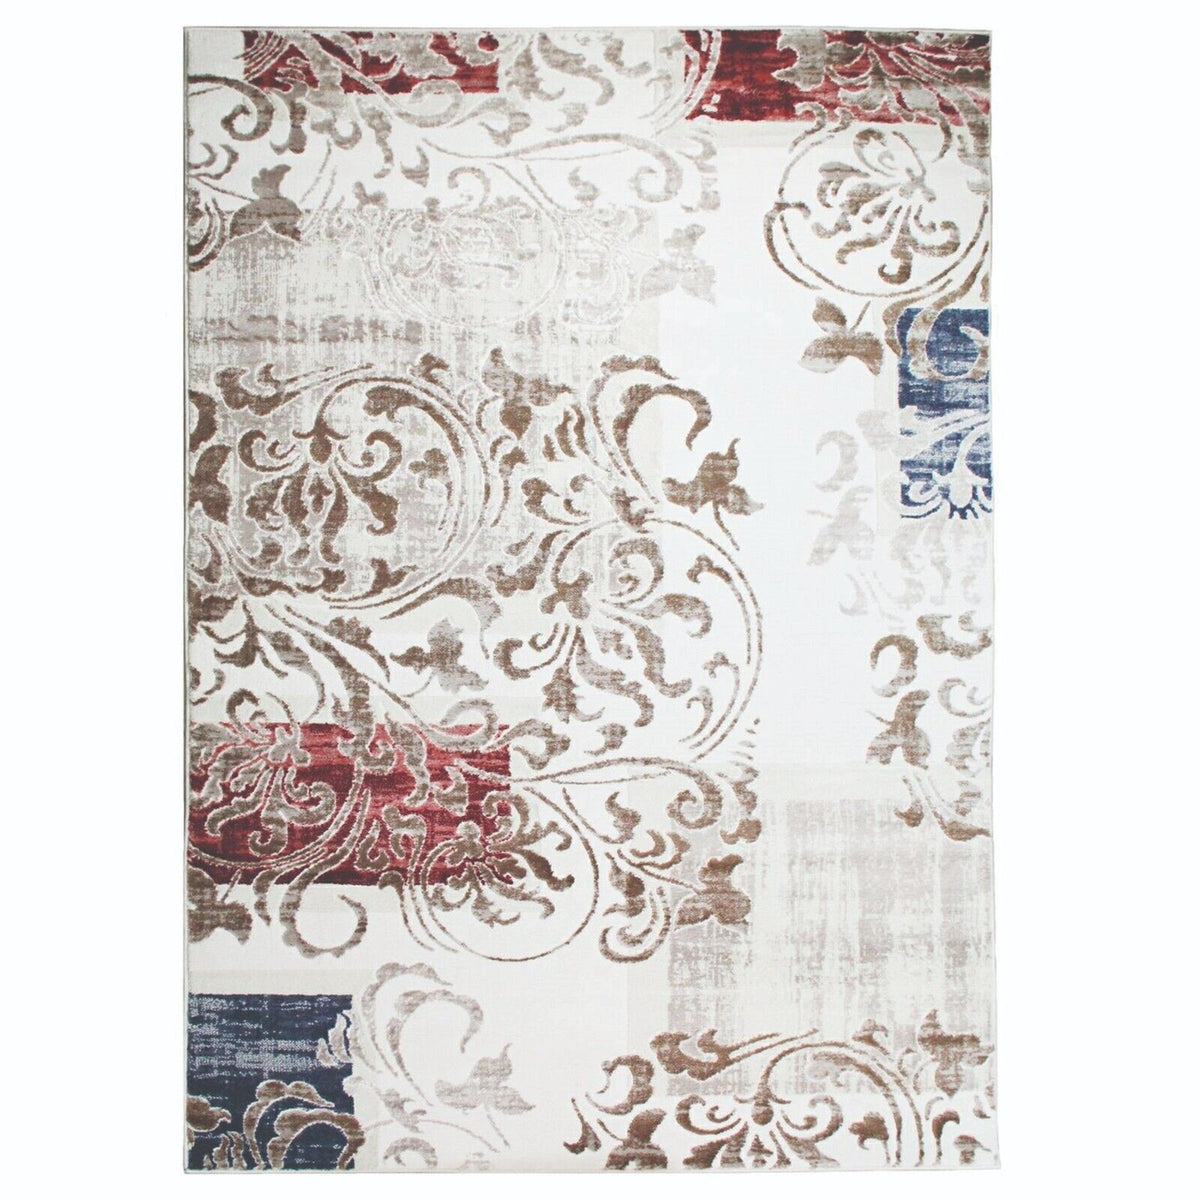 Storyville Modern Geometric Abstract Floral Scroll Area Rug or Runner